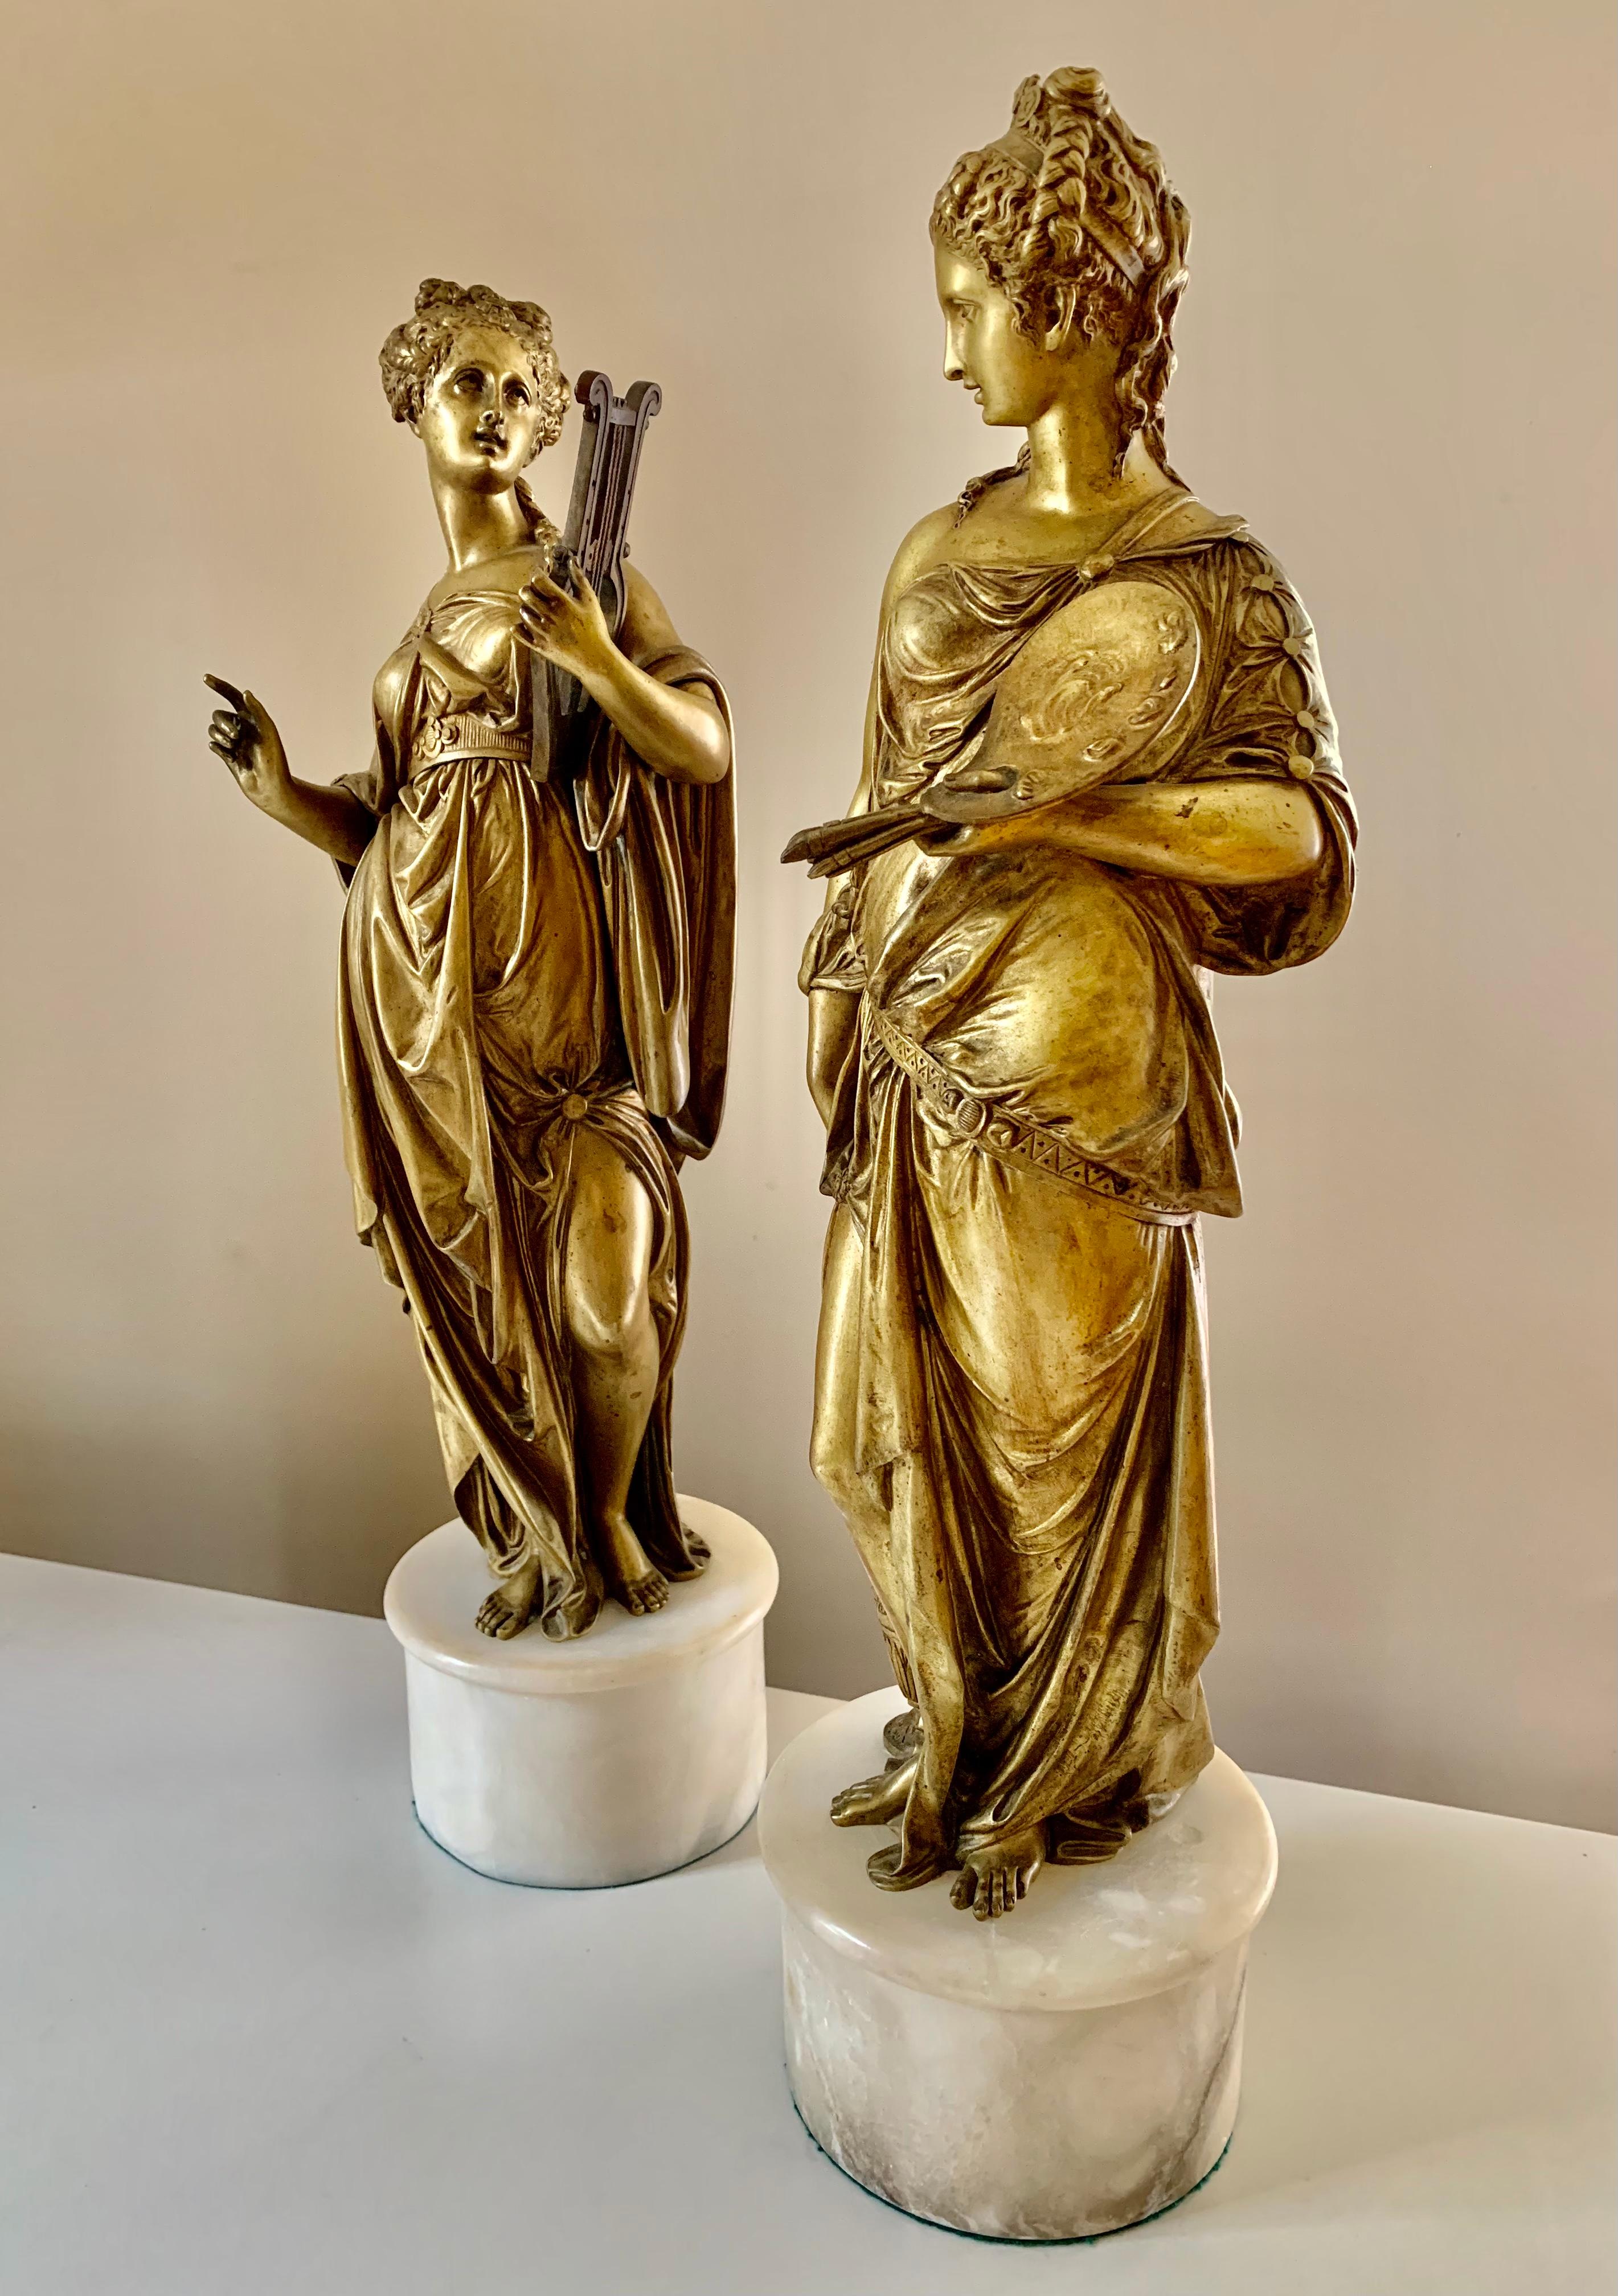 A pair of beautiful gilt bronze maidens representing Music and Art. 
Music holds a lyre, known for its use in Greek classical antiquity, in her left hand and is bringing her right hand forth to play the instrument with a beguiling expression. She